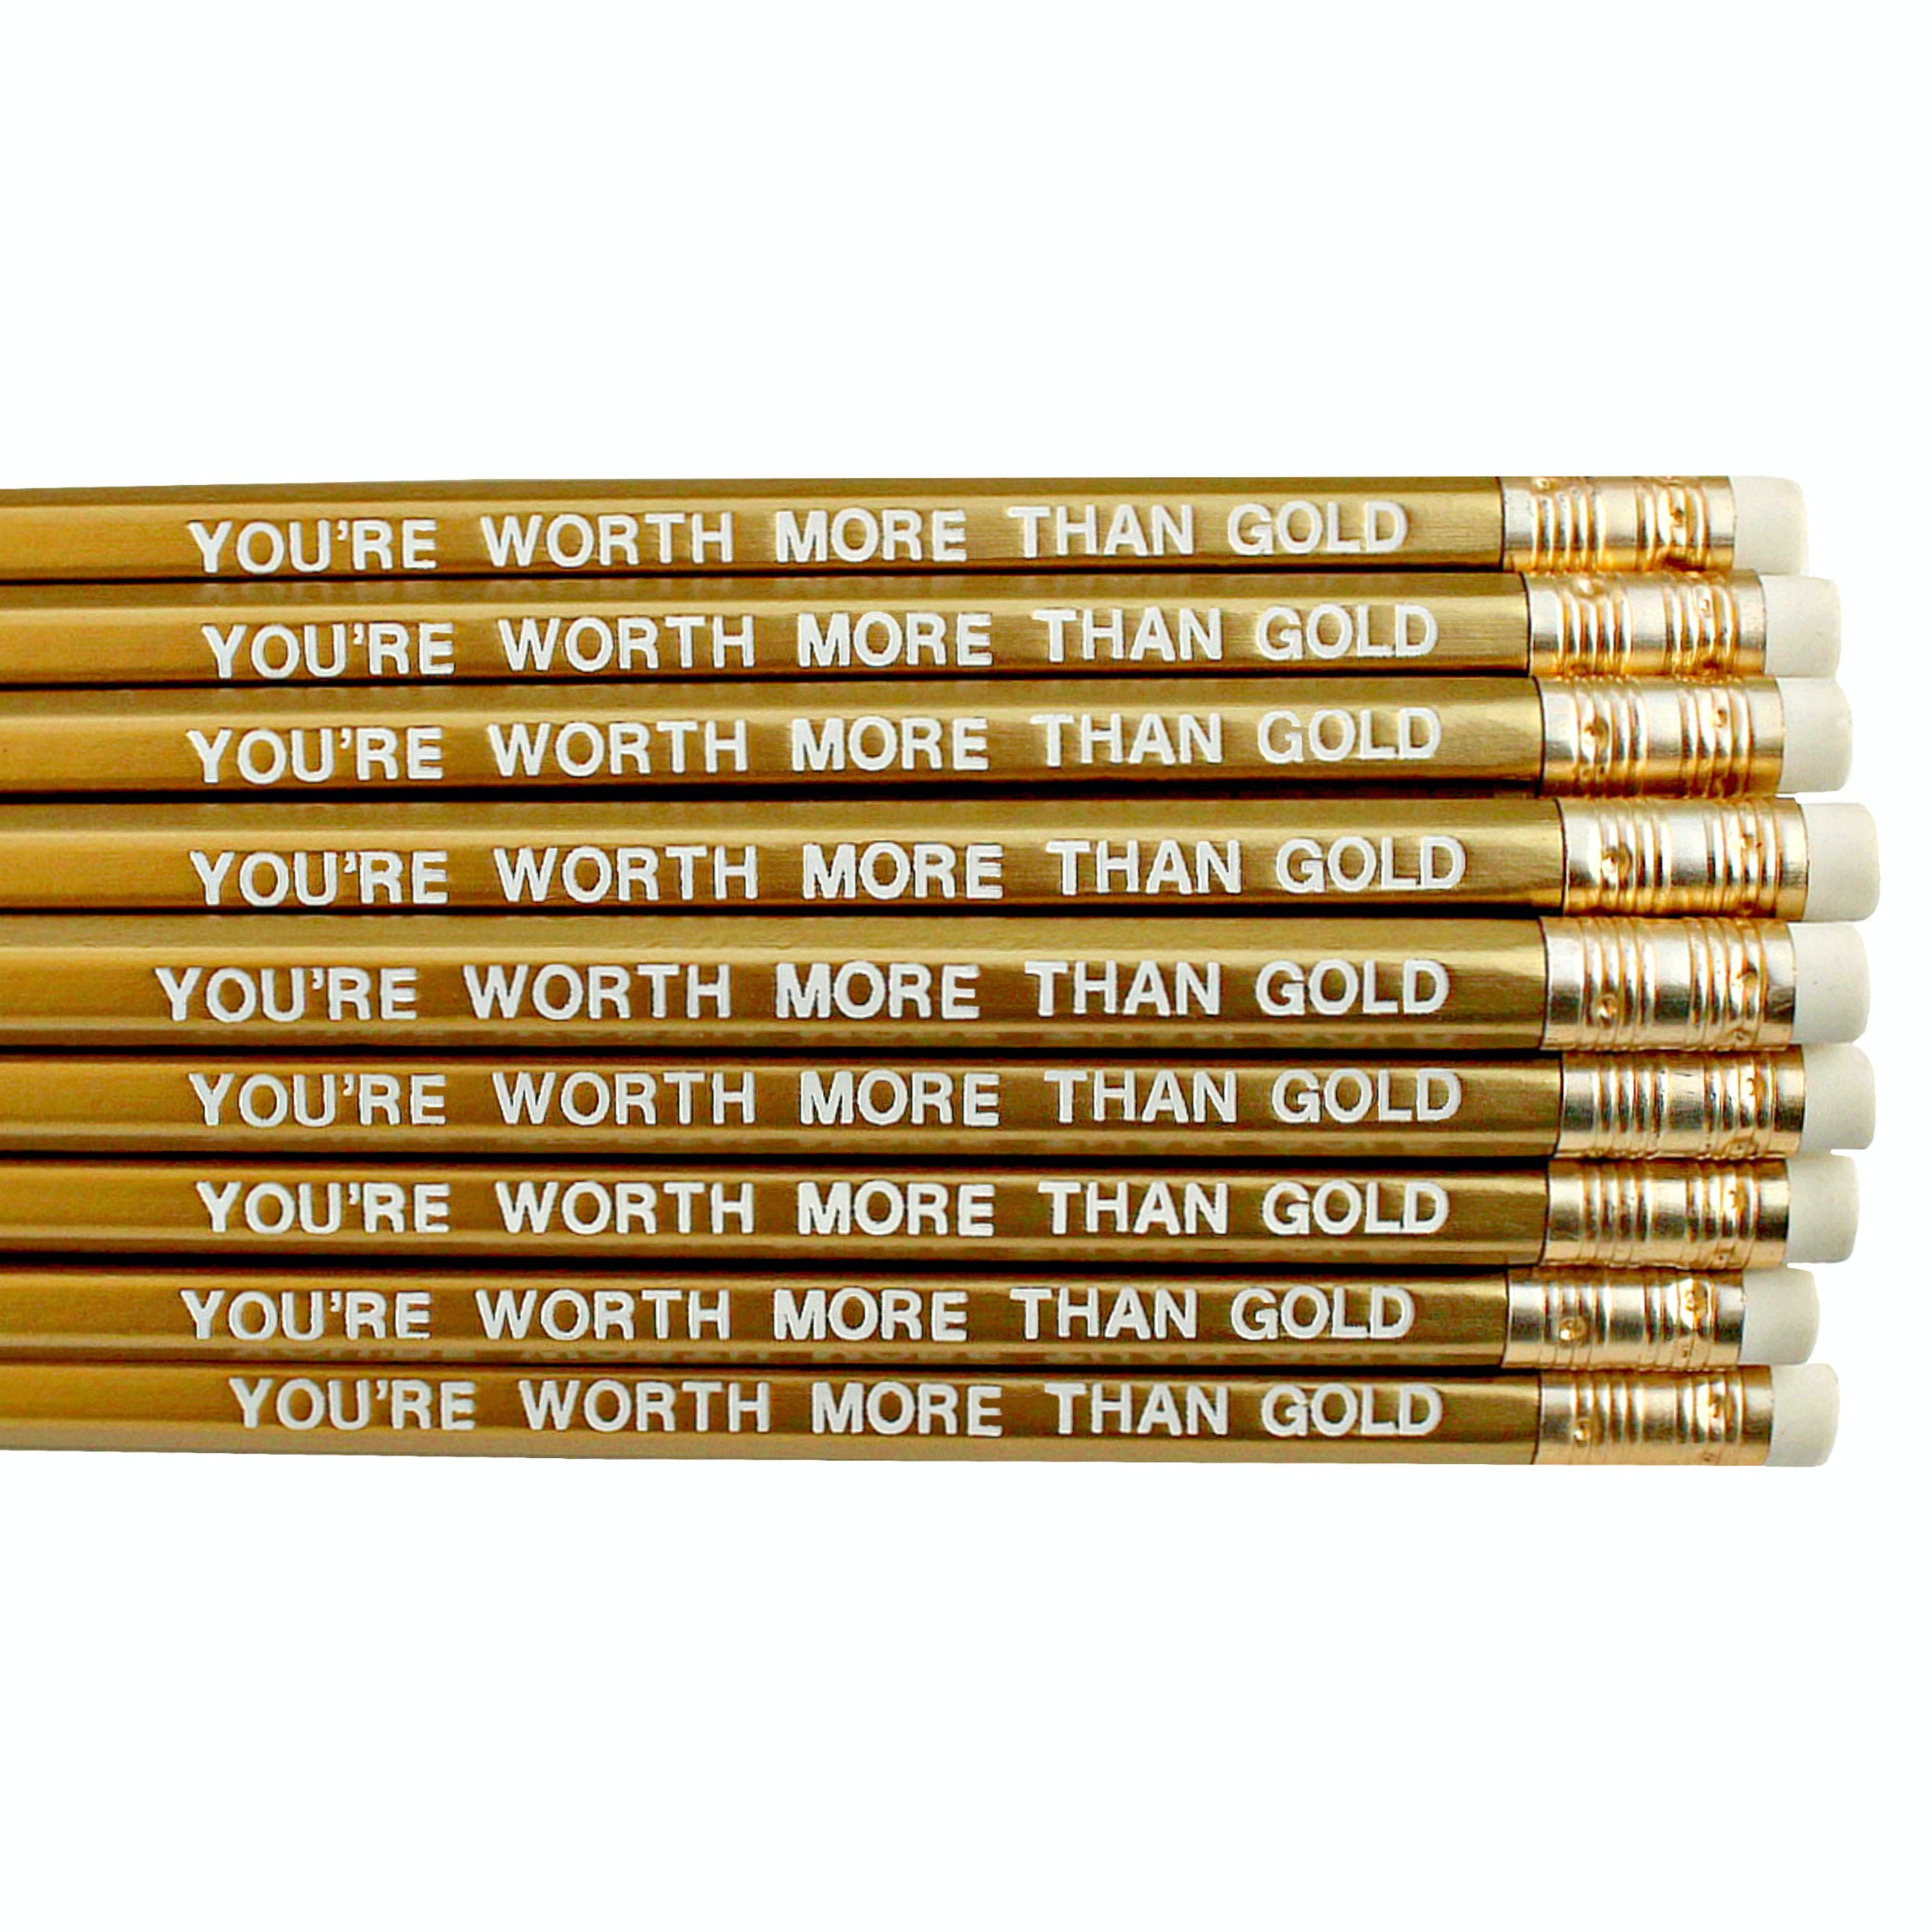 INSPIRATIONAL Pencils, Kids Gift, Motivational Pencils, Ready to Ship,  Quotes on Pencils, Positive Affirmations, Positive Quotes, Homeschool 